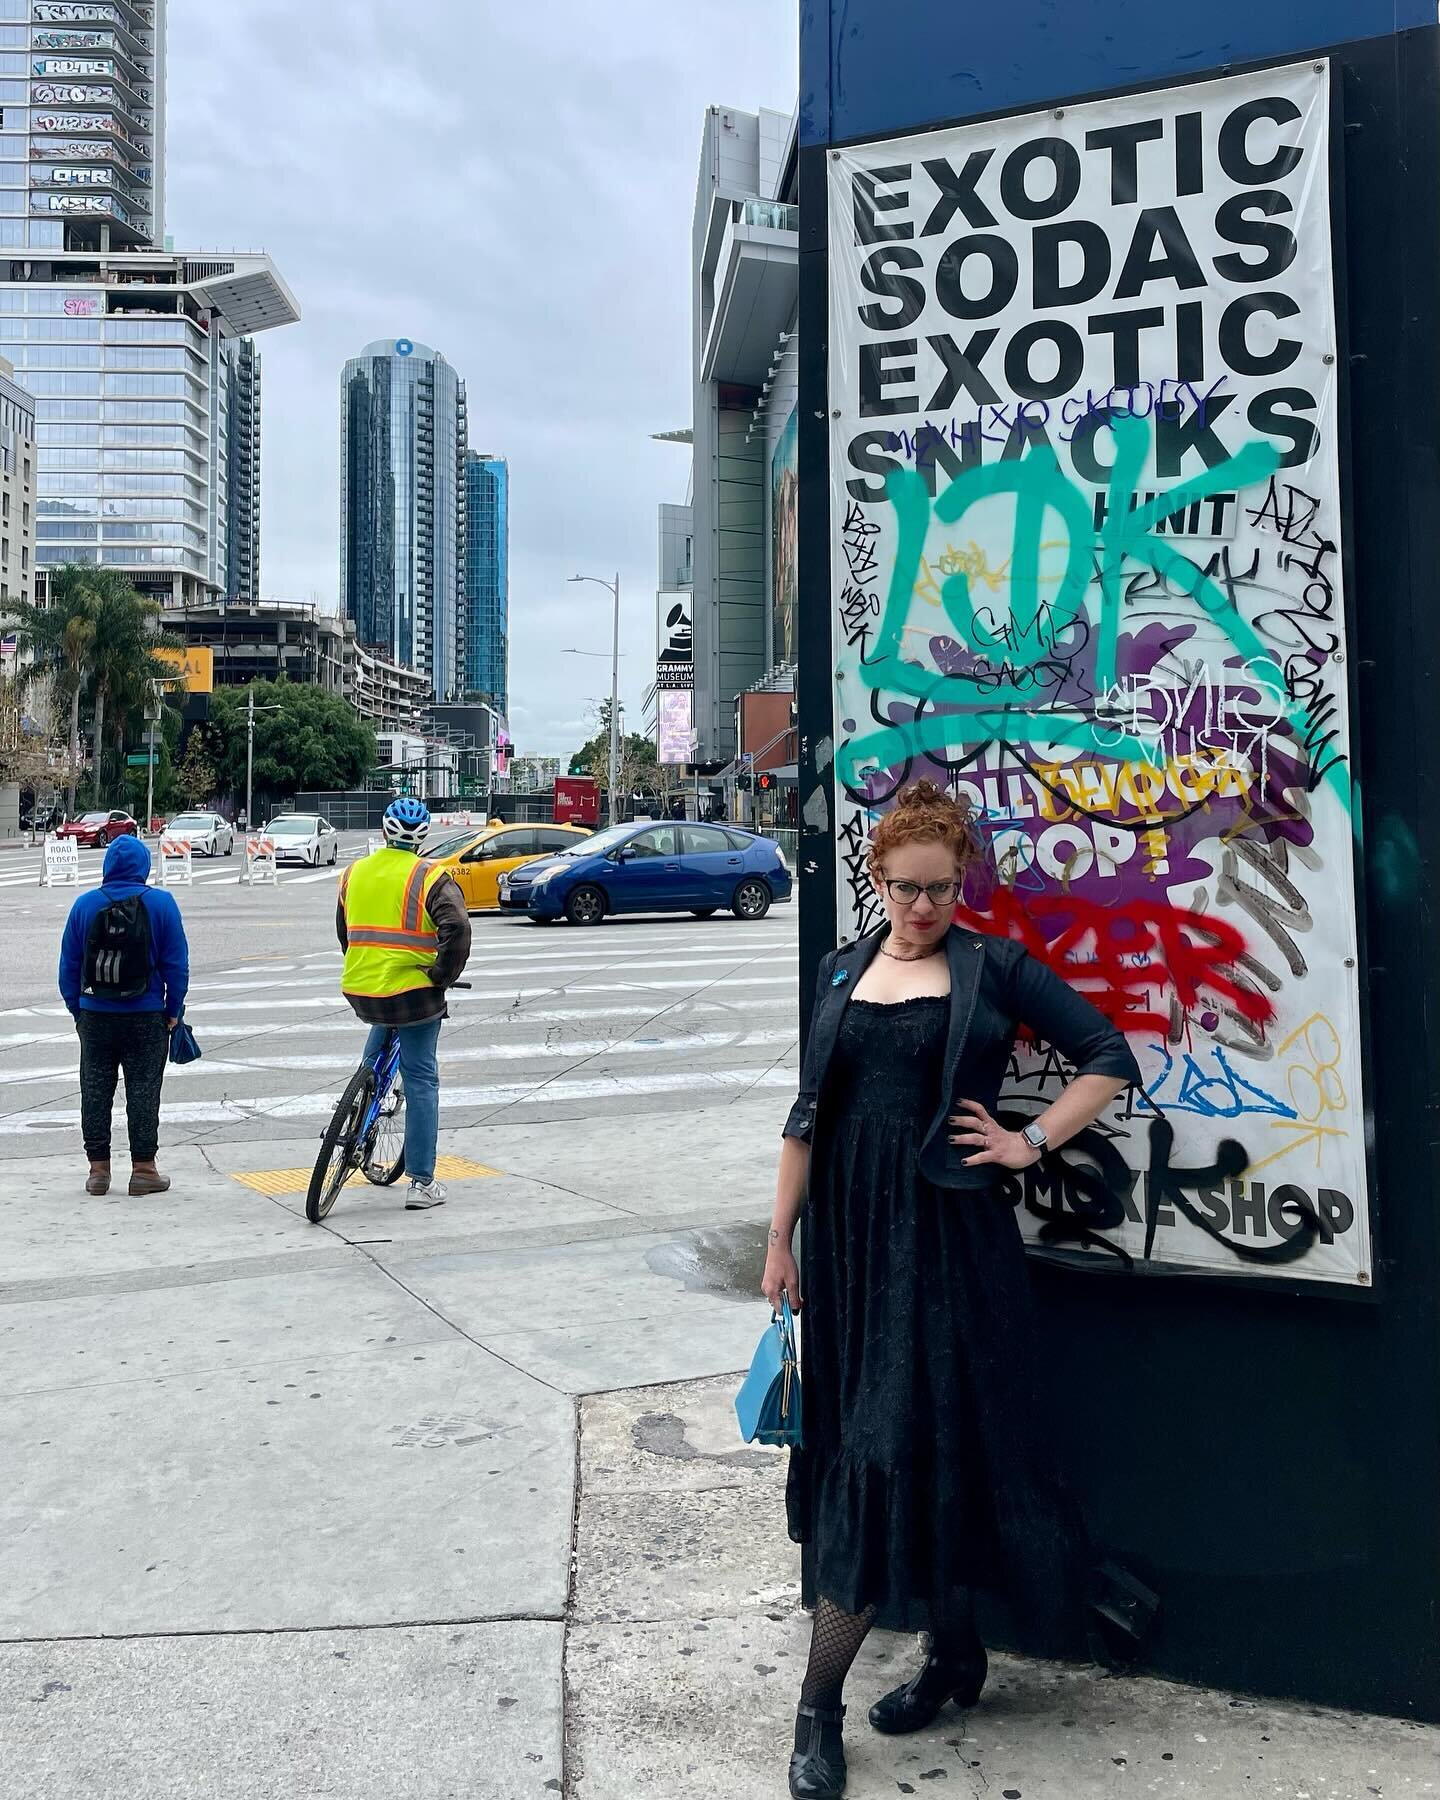 My before / after @recordingacademy pics! You can put me in a dress and (very low) heels but I&rsquo;m still more comfortable posing in front of DTLA graffiti than walking the red carpet. More about the show, the celebrations, the joy, the MUSIC late